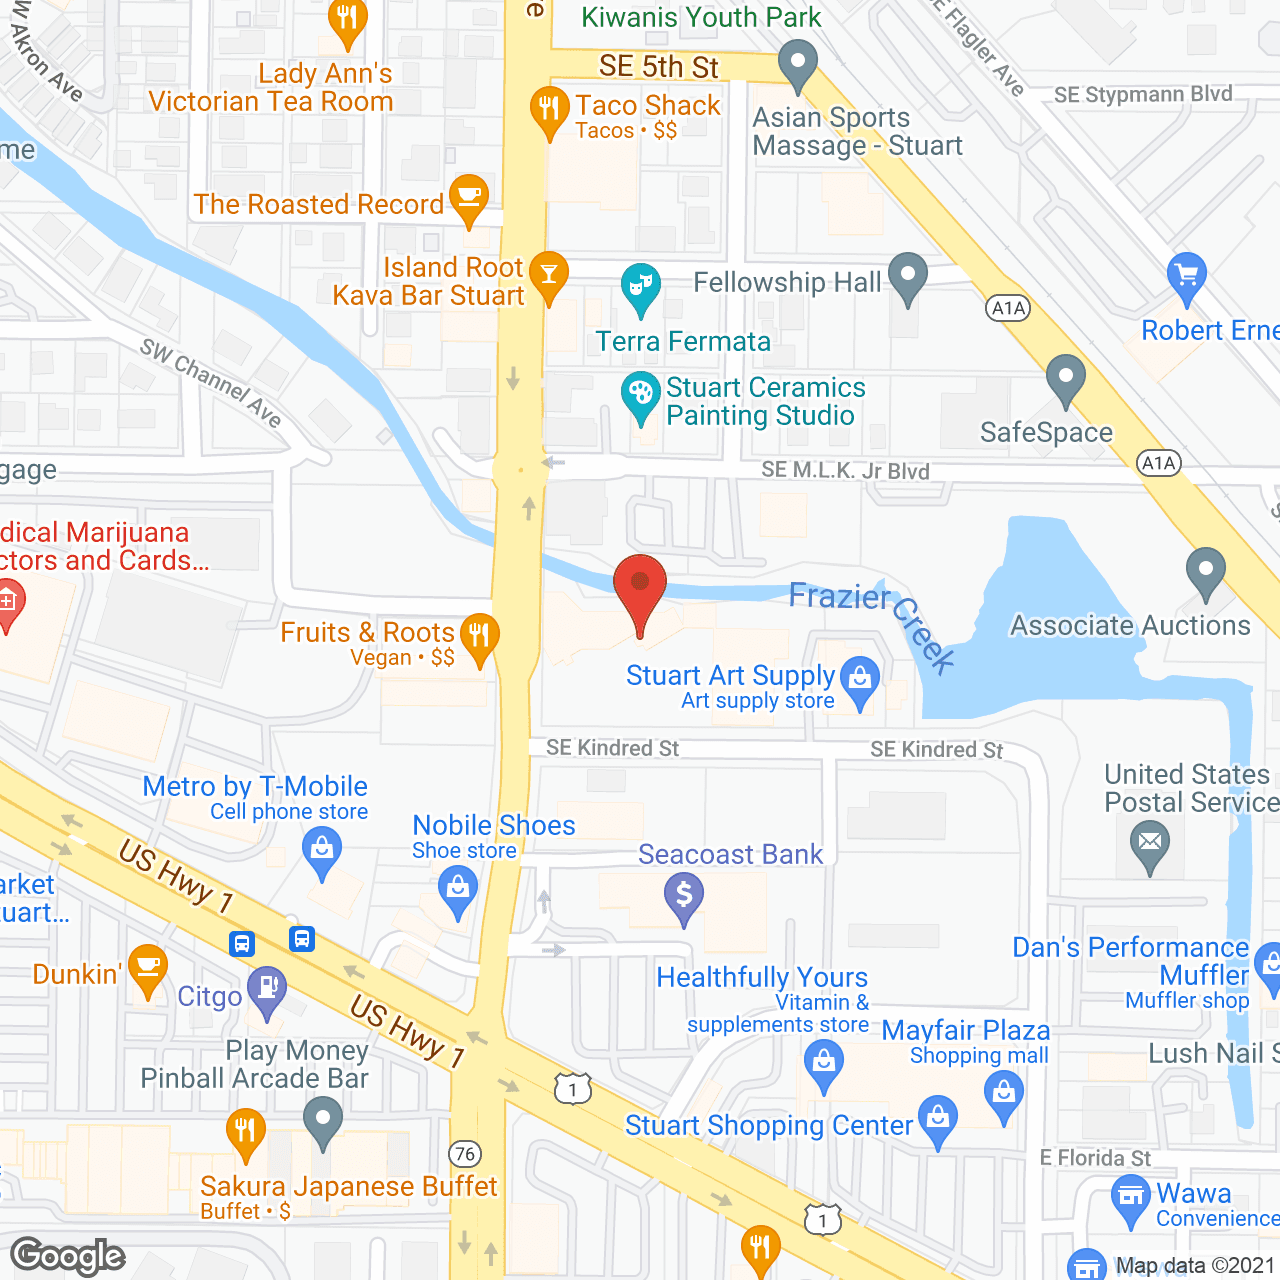 Companion Connection in google map